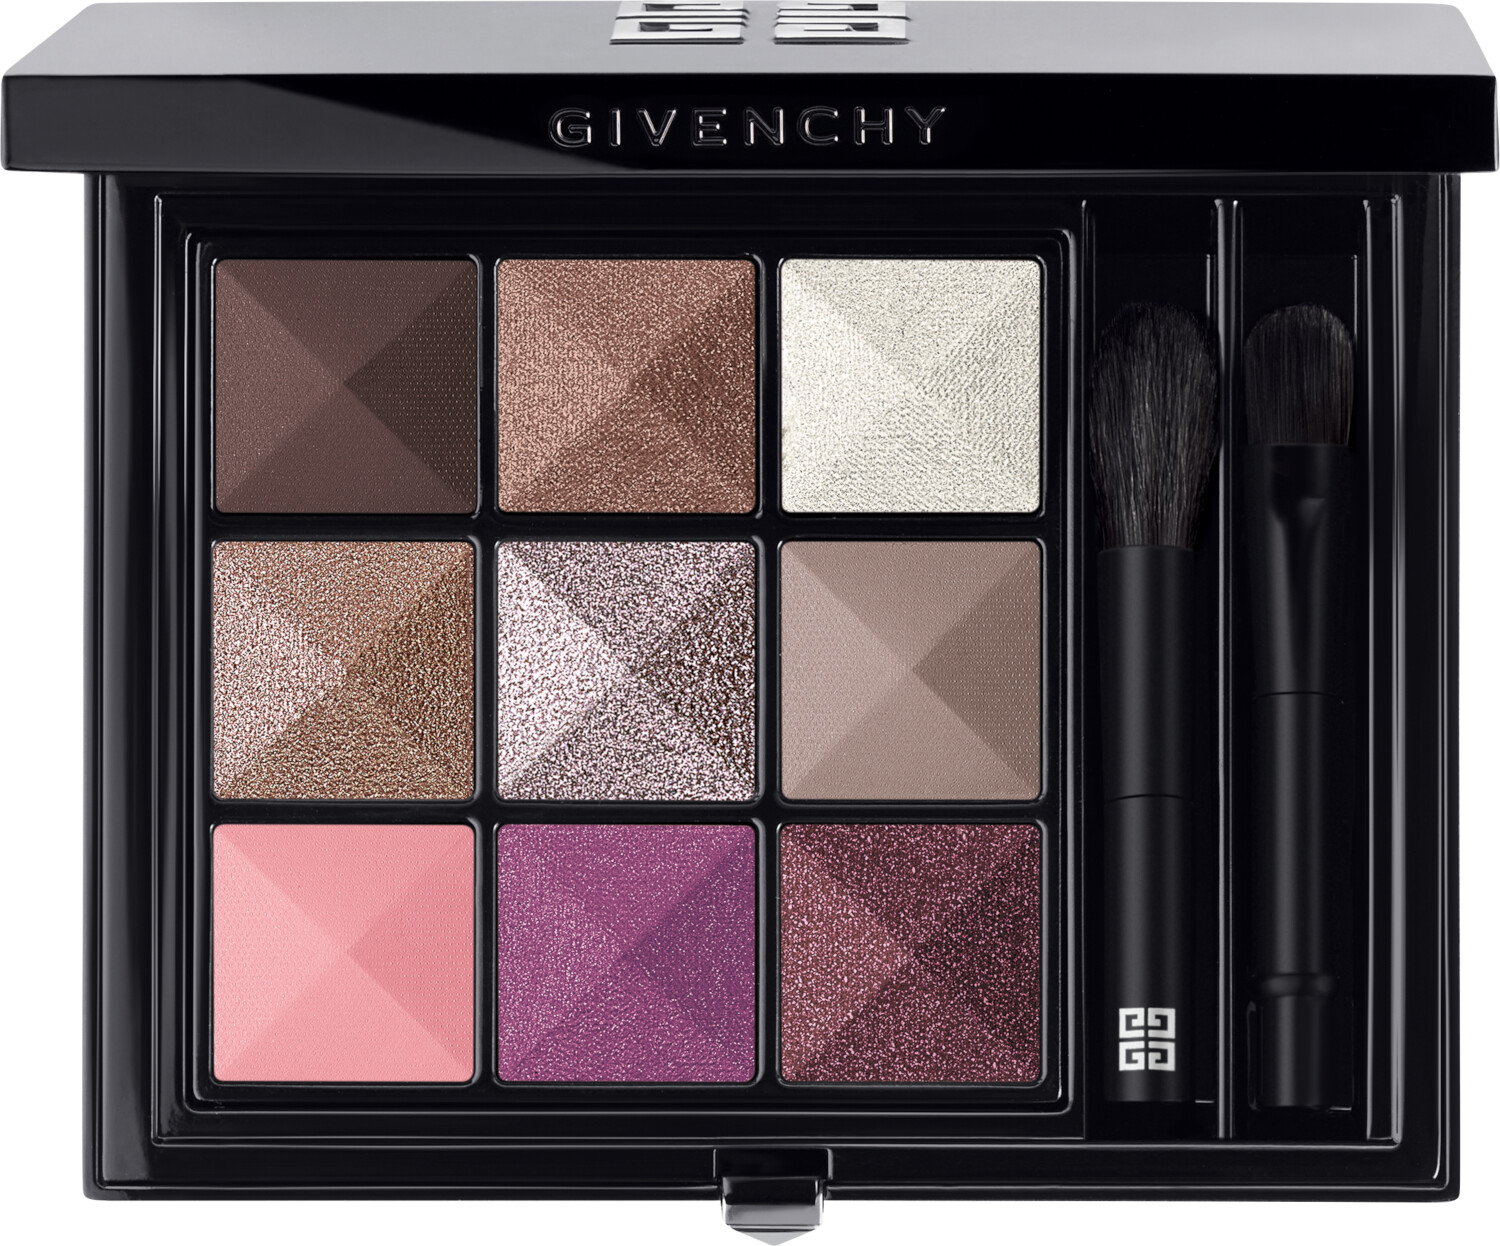 GIVENCHY Le 9 De Givenchy Eyeshadow Palette 8g Le 9.03